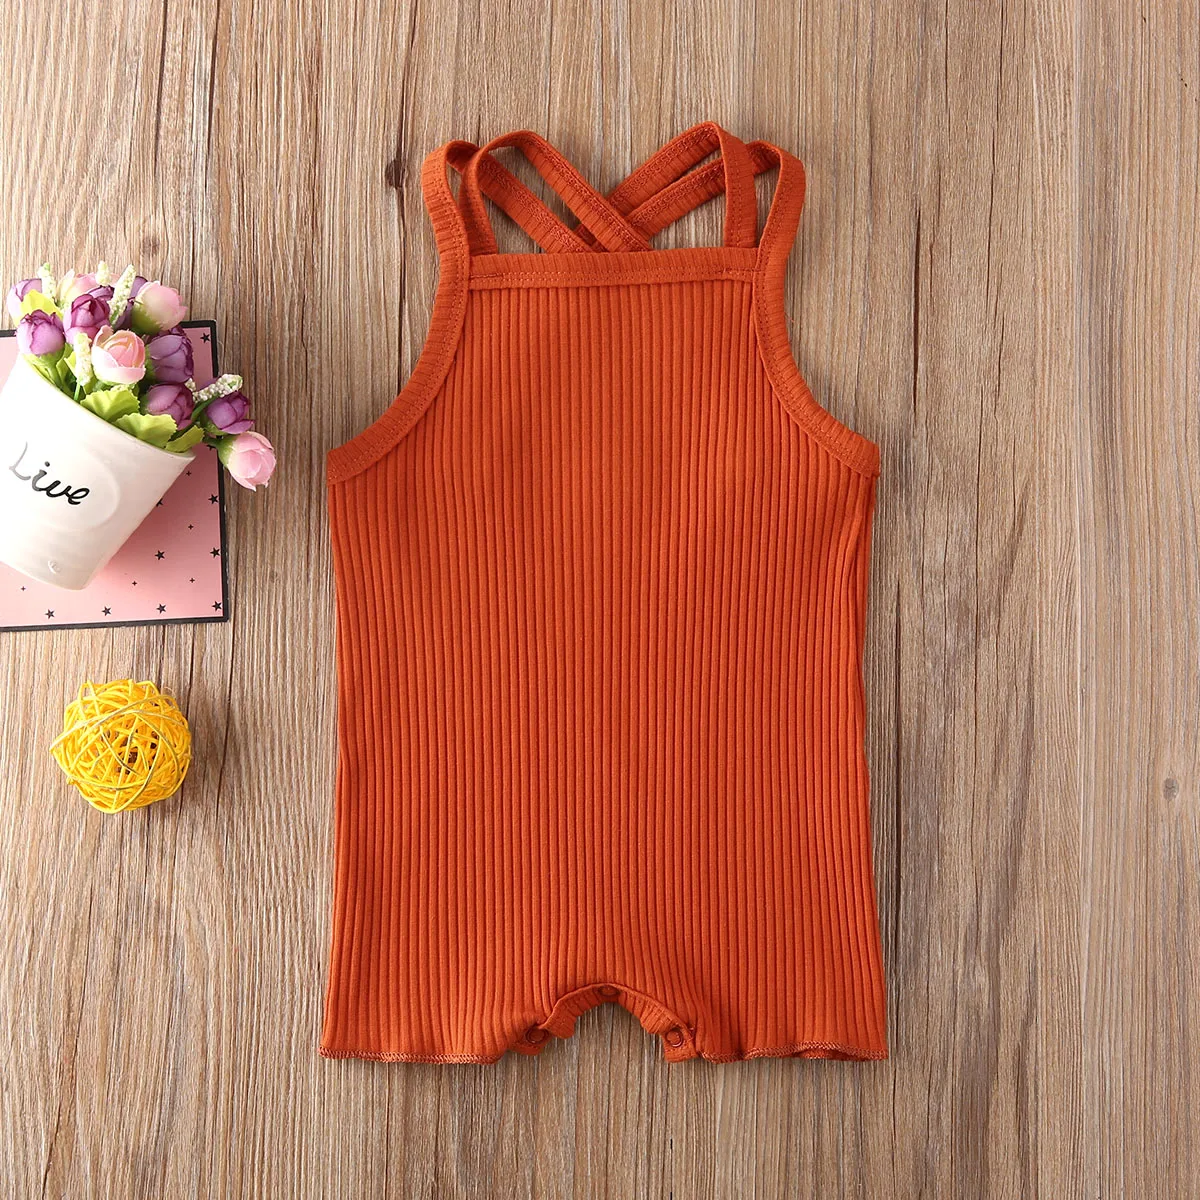 2020 Baby Summer Clothing Baby Kids Boy Girl Infant Romper Jumpsuit Cotton Outfits Set Ribbed Solid Clothes Baby Bodysuits comfotable Baby Rompers